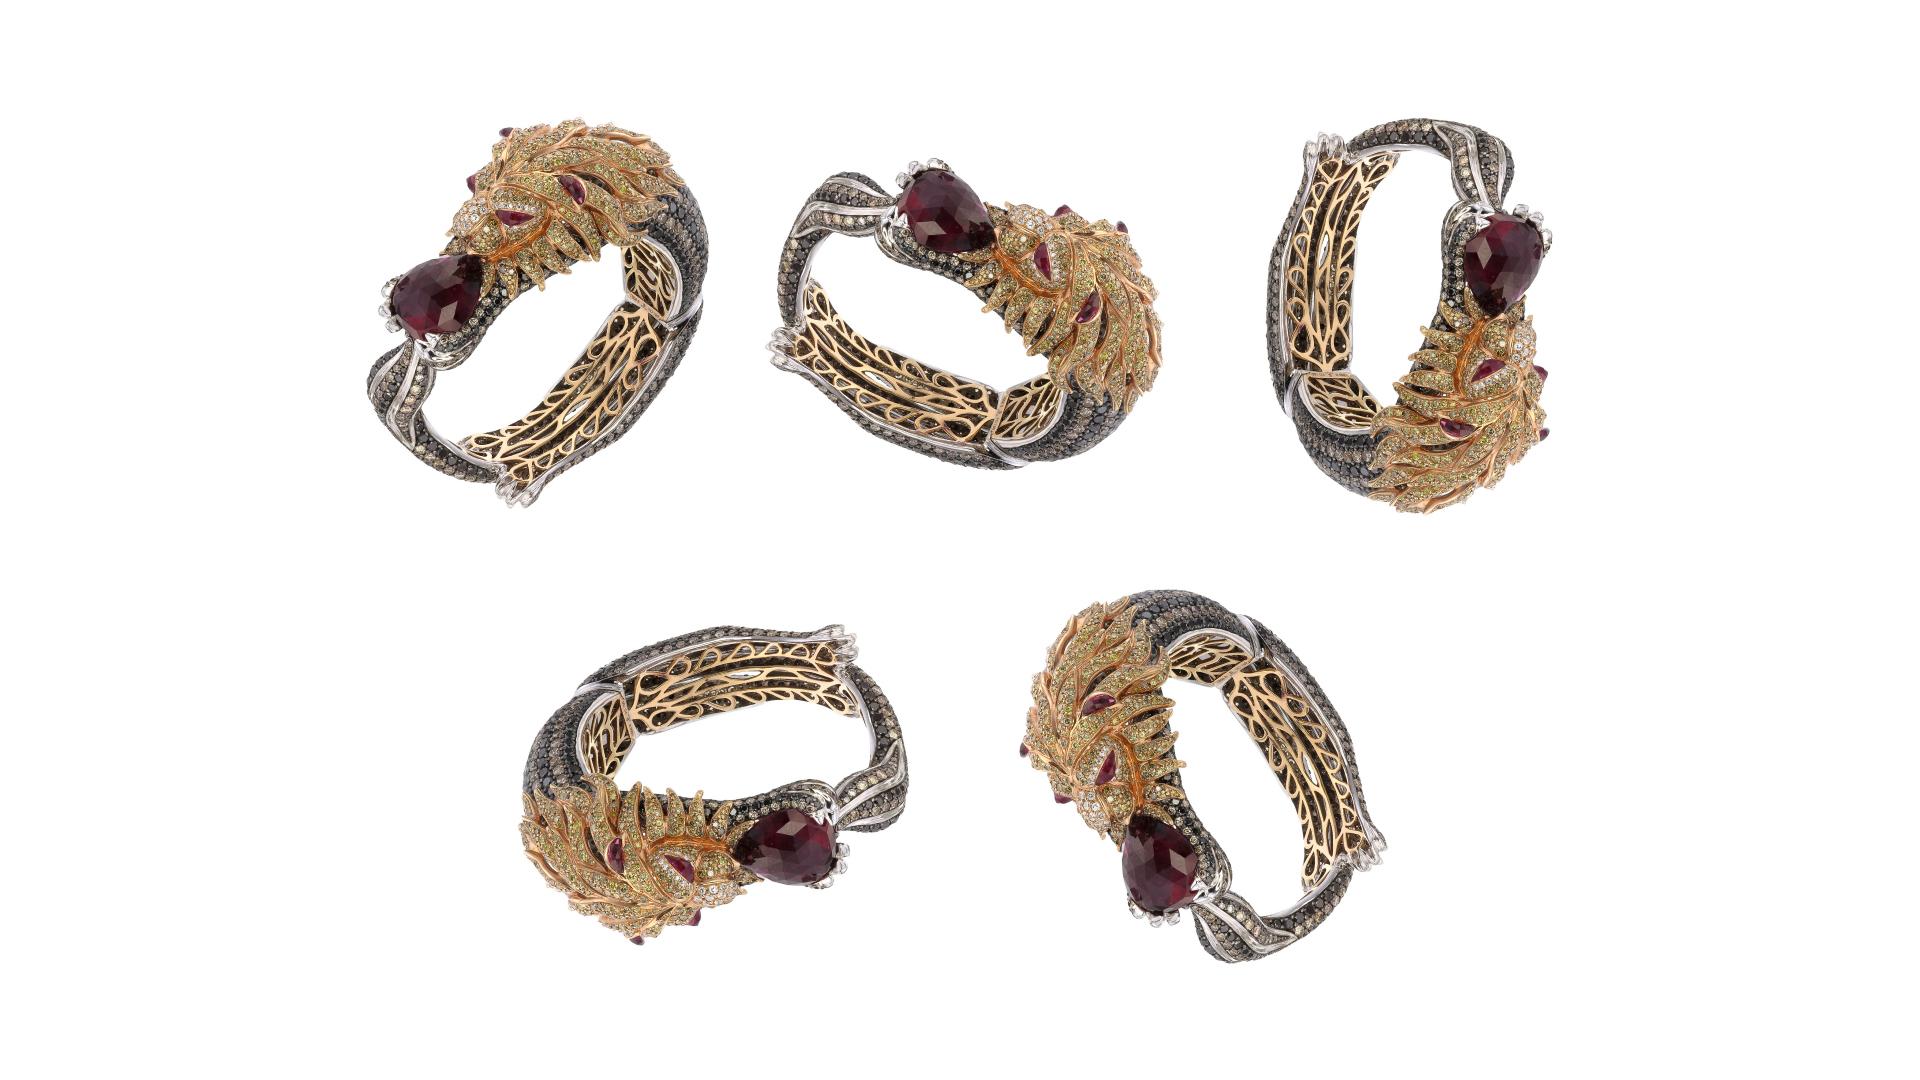 Aesthetic Movement Zorab Creation’s 19.66-Ct Rubellite Stout-hearted Lion Bangle  For Sale